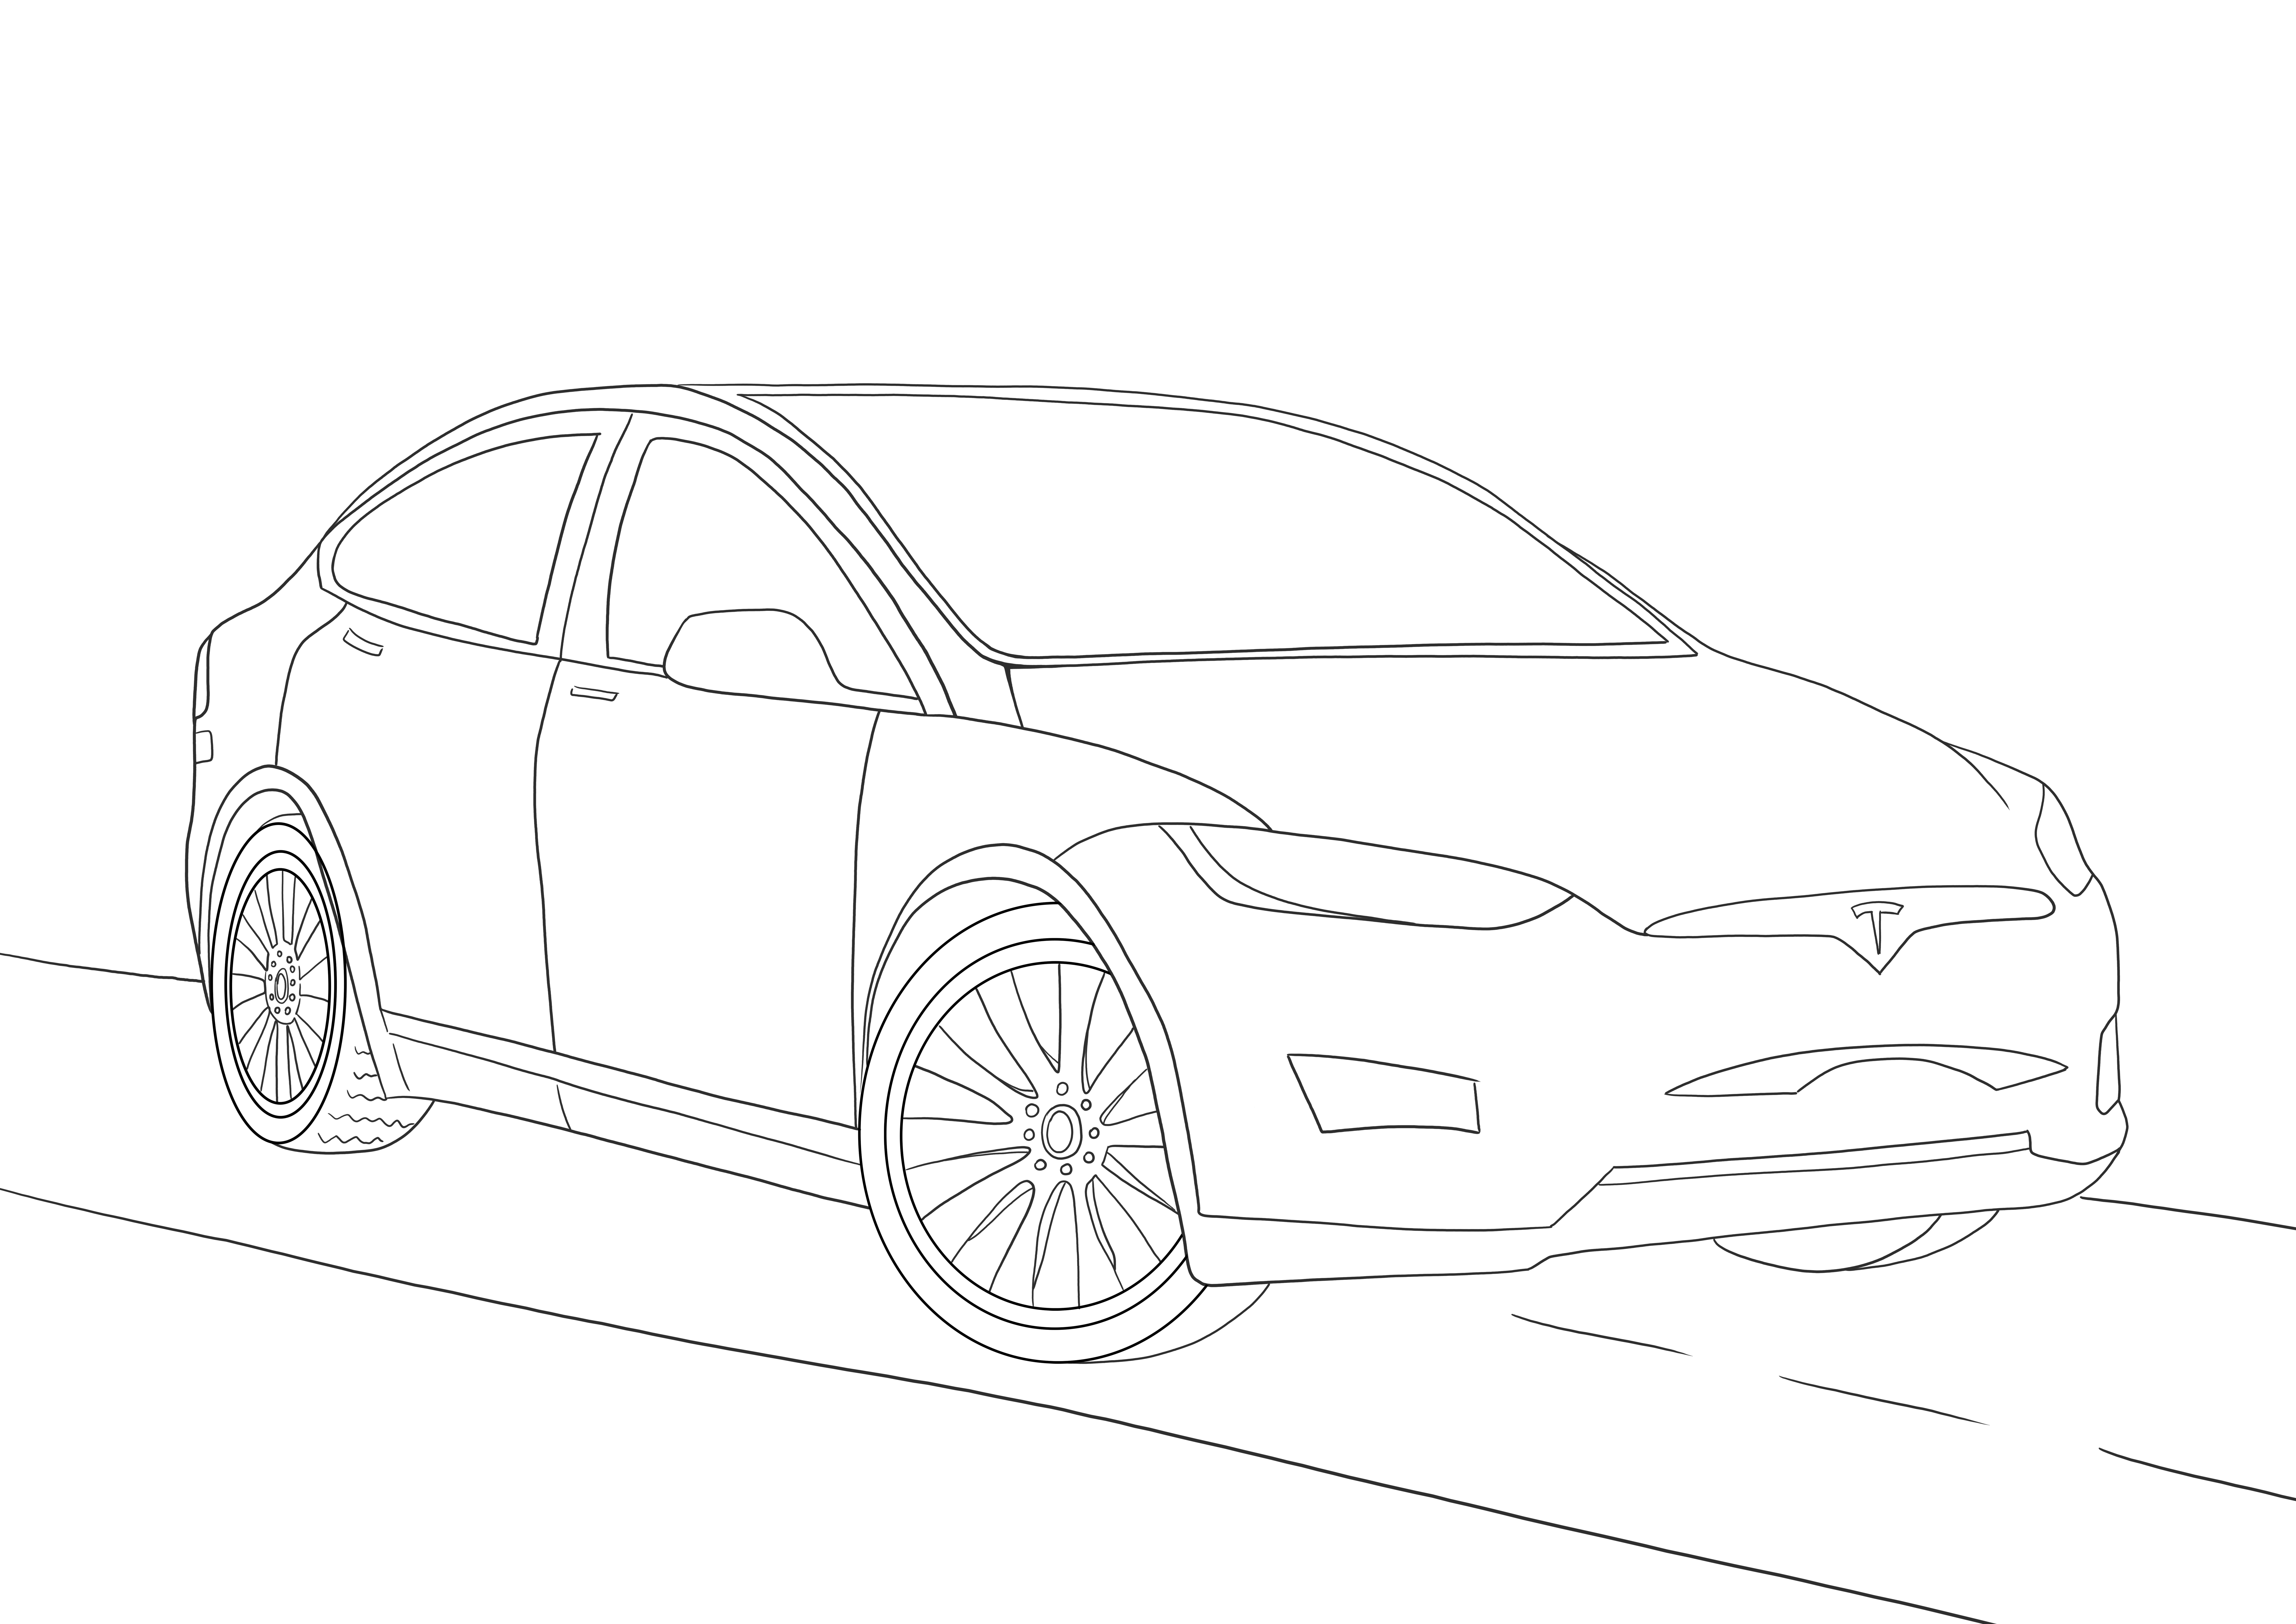 Tesla Model X-great coloring sheet for fast cars lovers free to download